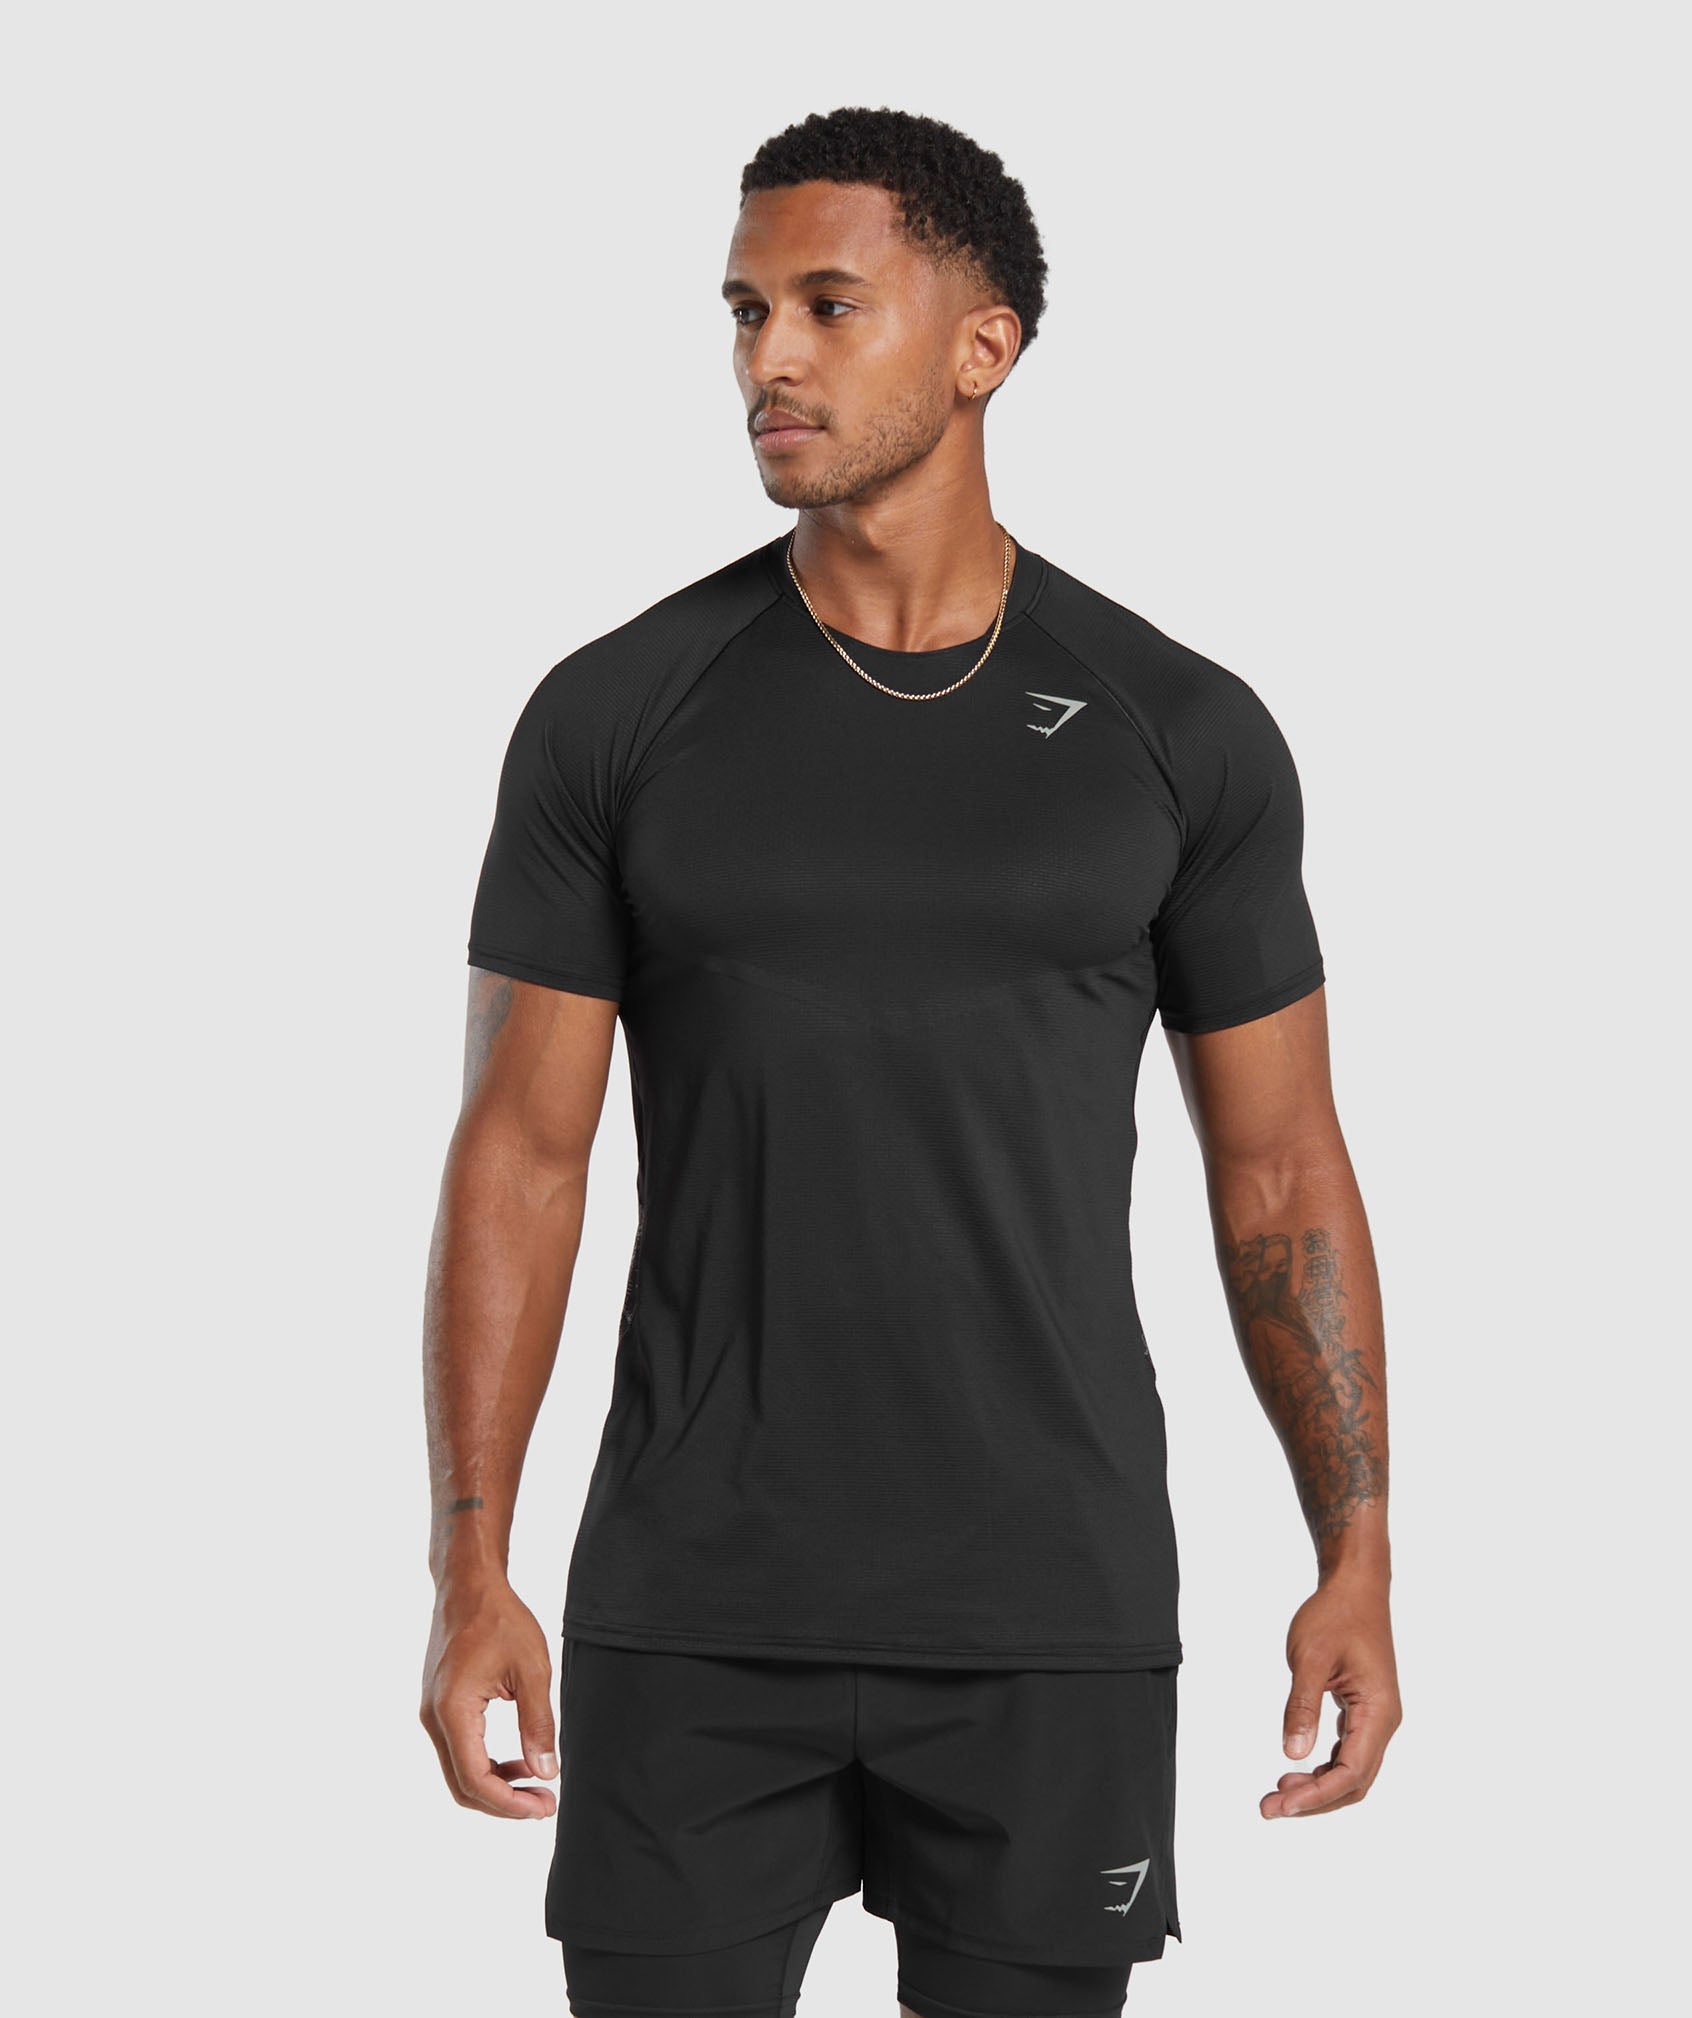 Speed T-Shirt in Black - view 1